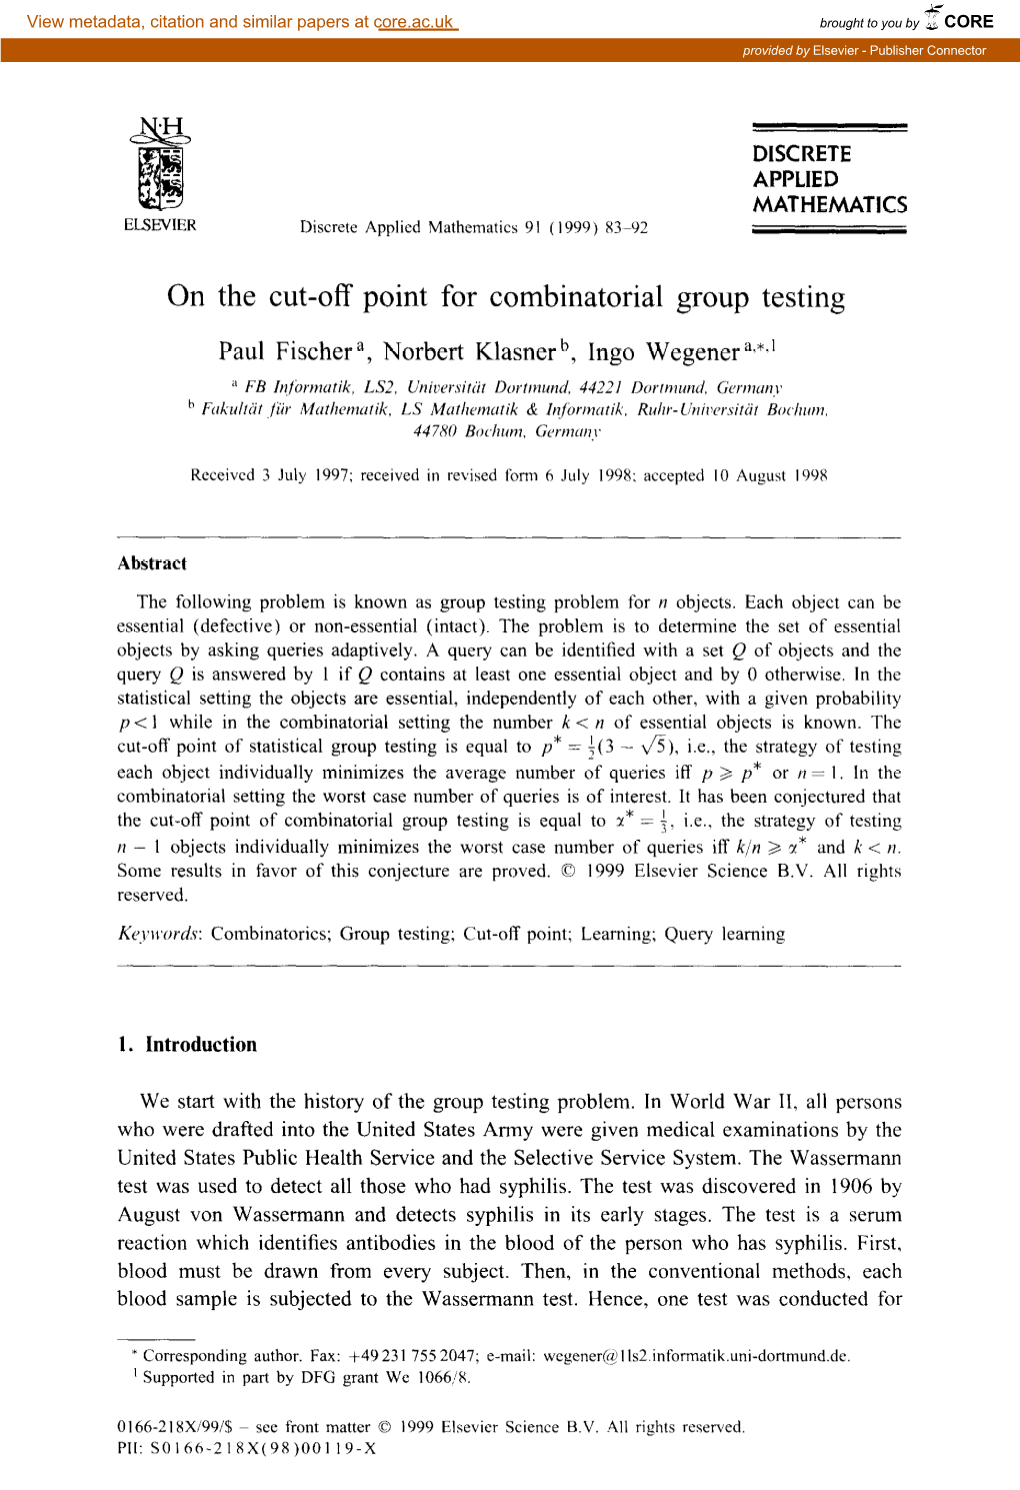 On the Cut-Off Point for Combinatorial Group Testing